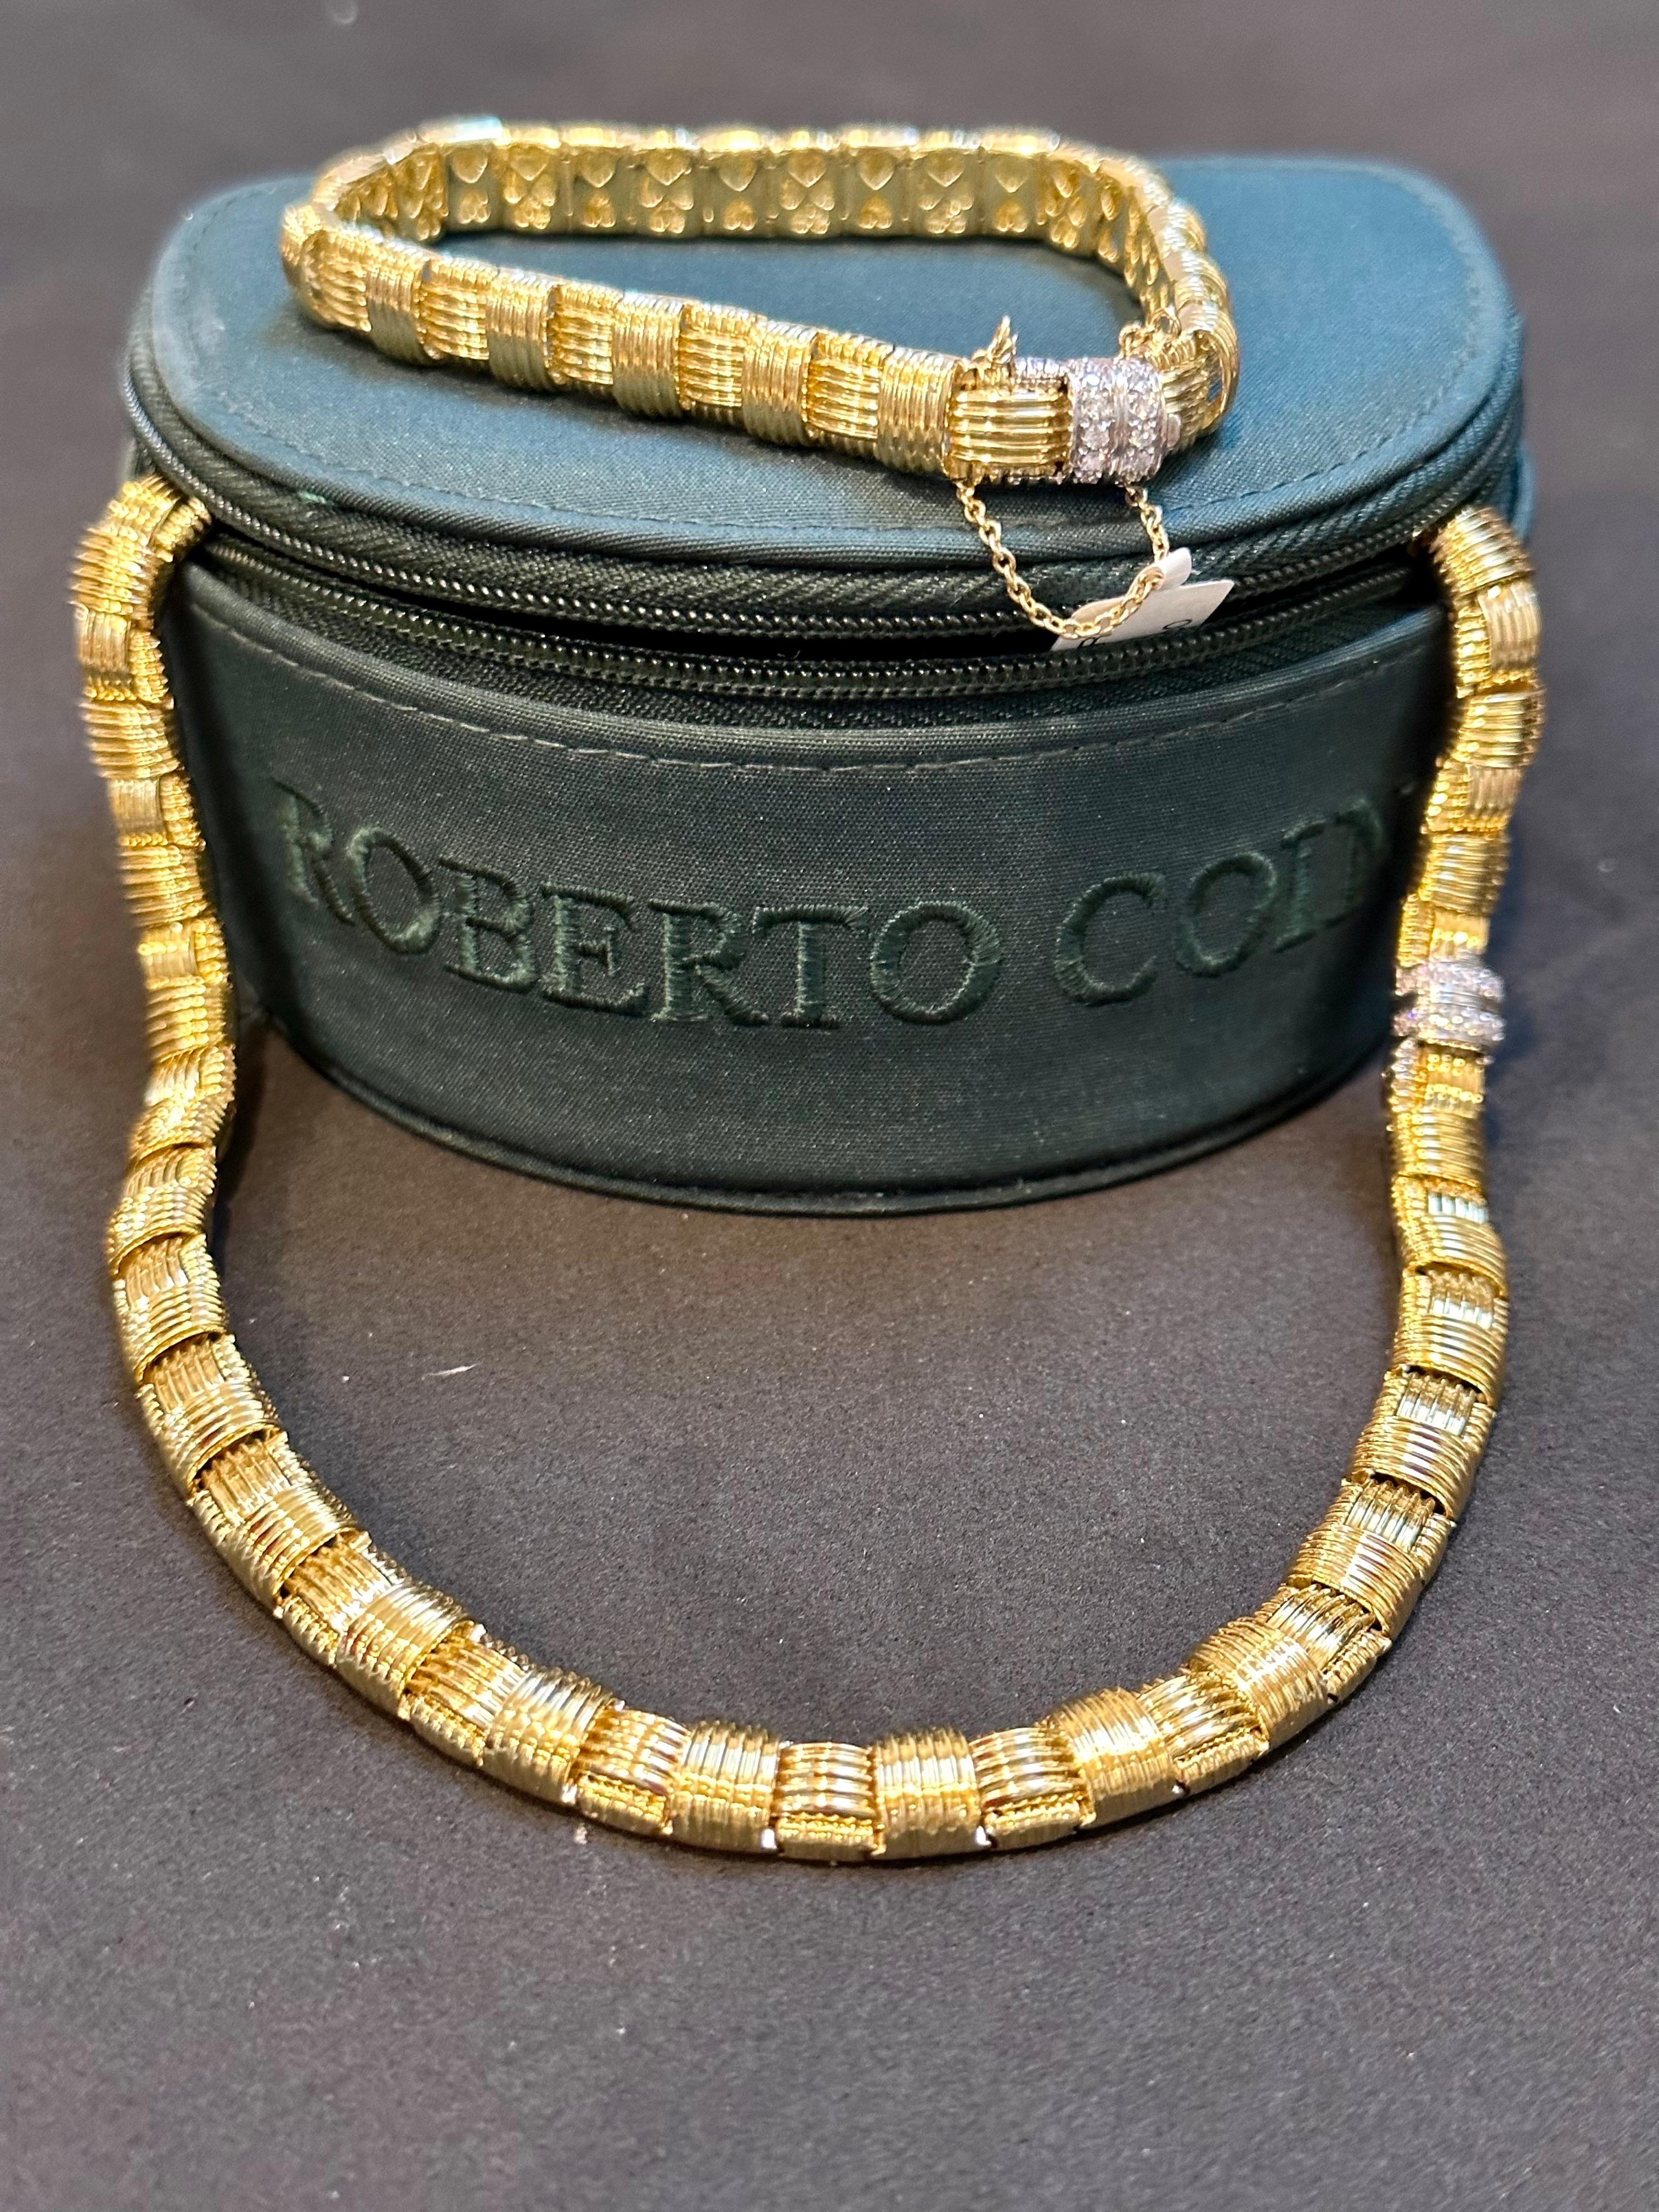 Roberto Coin Appassionata Necklace in 18 Karat Gold 70 Grams and Diamonds For Sale 12